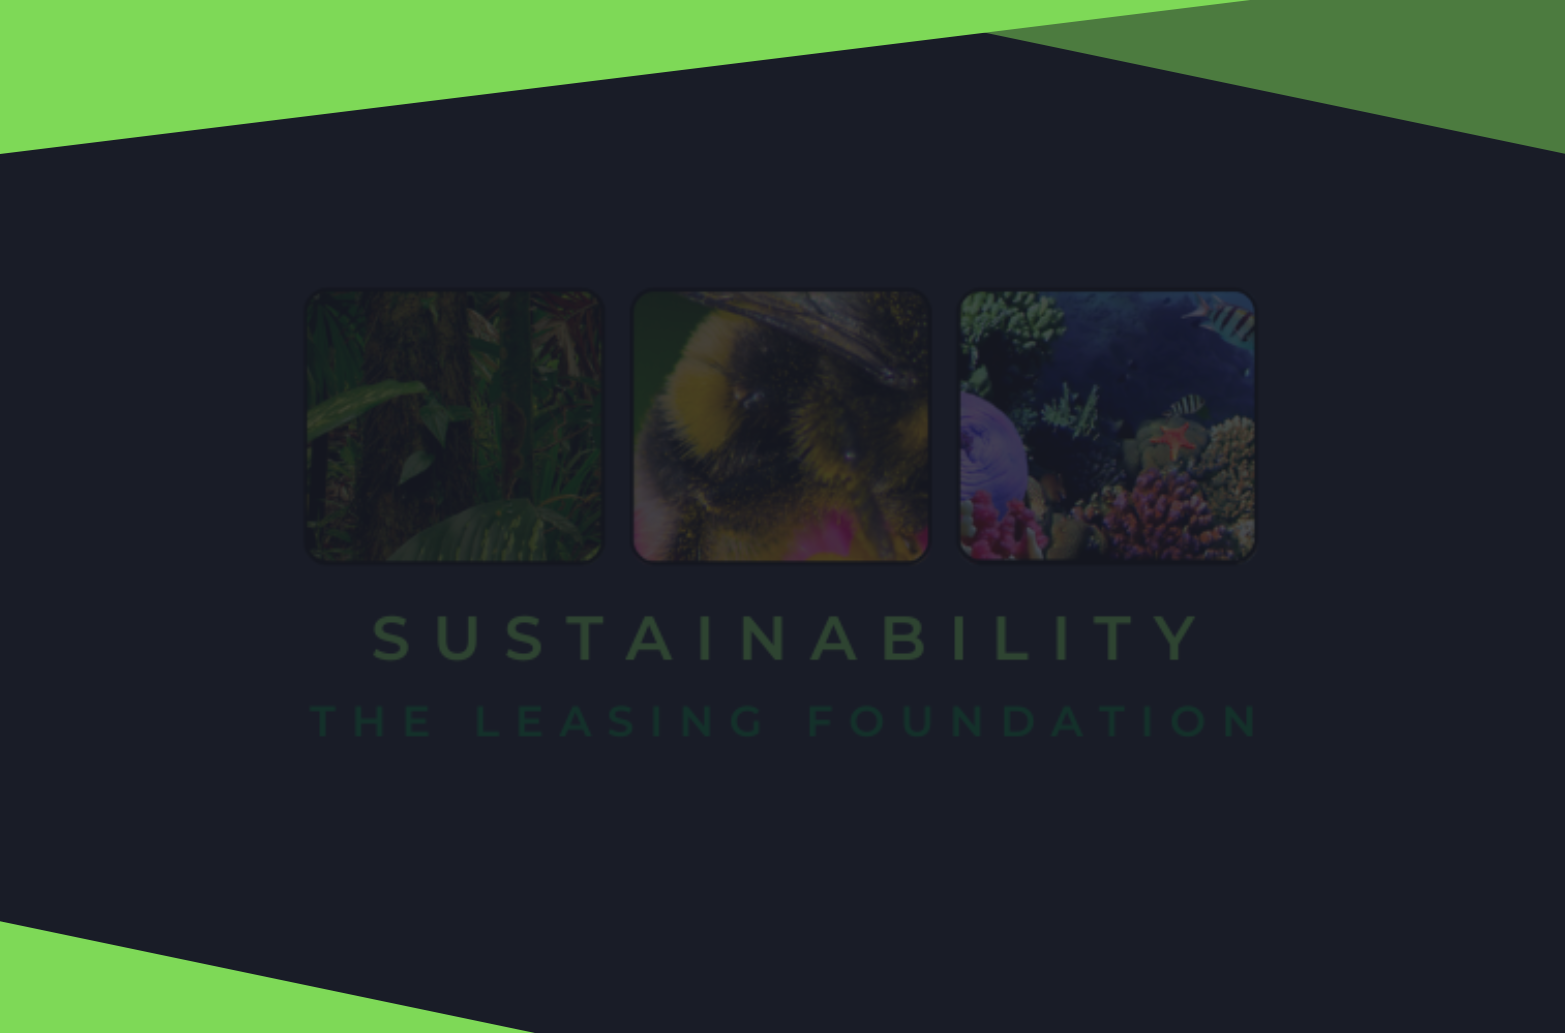 Leasing Foundation officially launches Sustainability Initiative